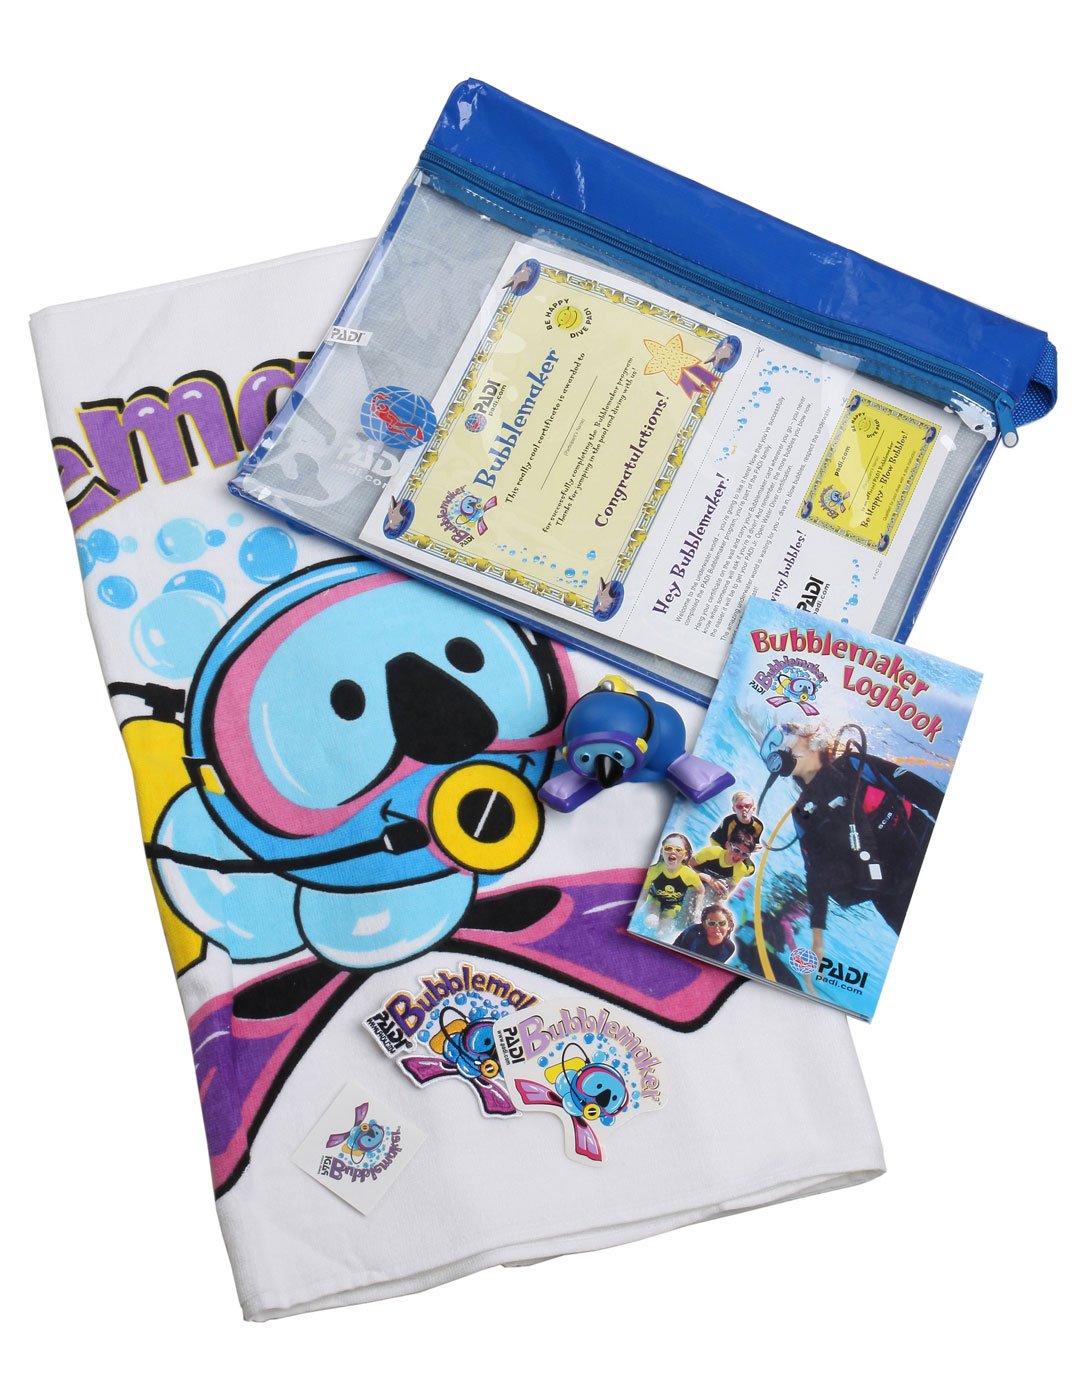 Image of Bubblemaker Crewpack